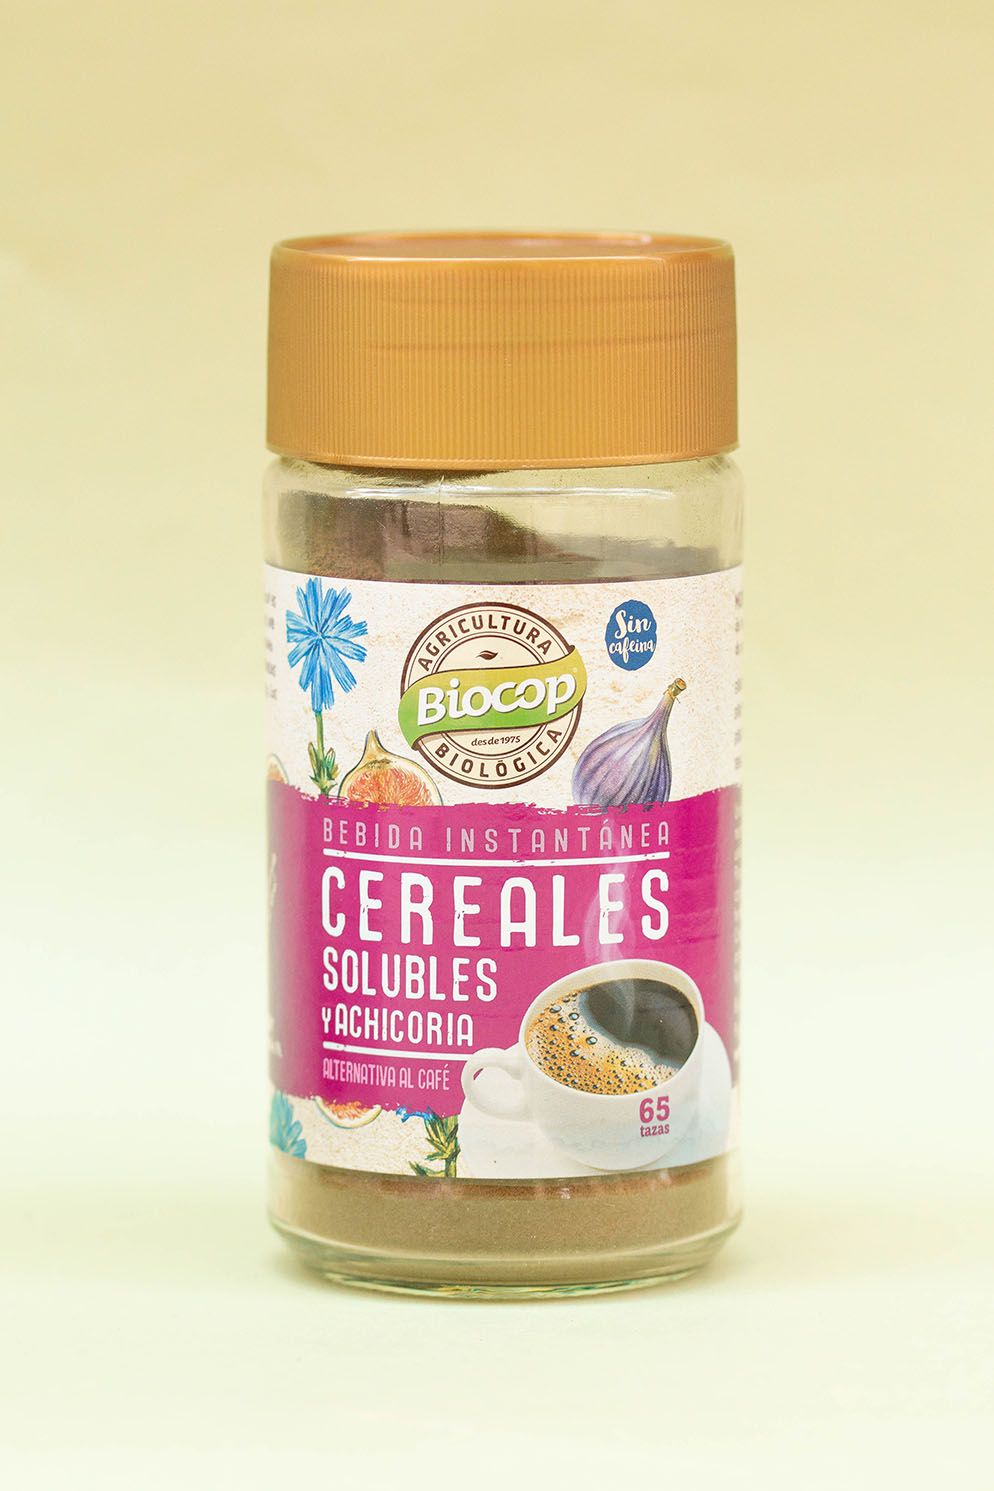 Cereales solubles